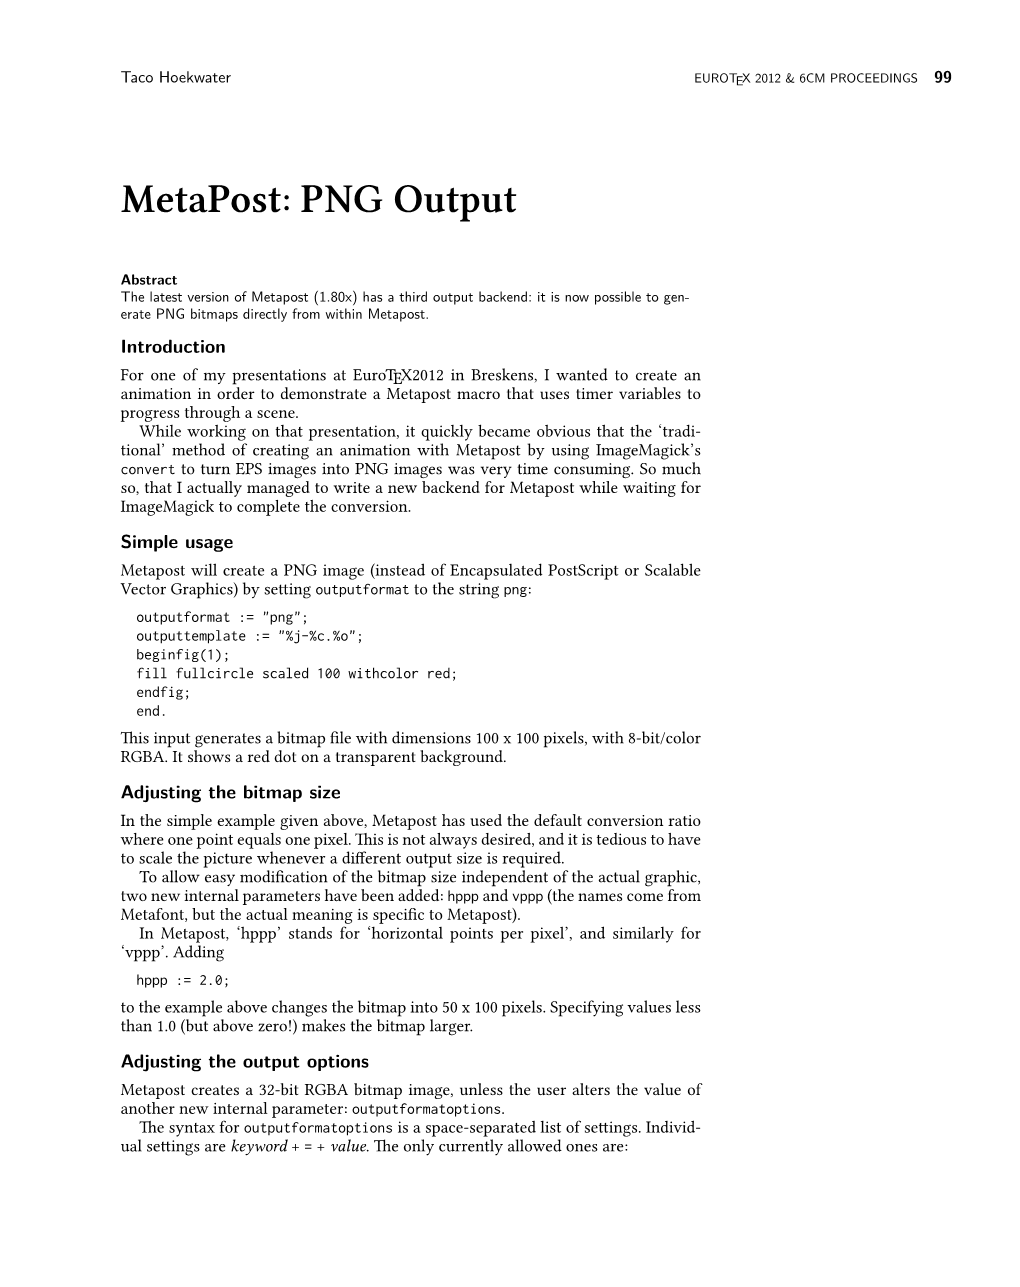 Metapost: PNG Output